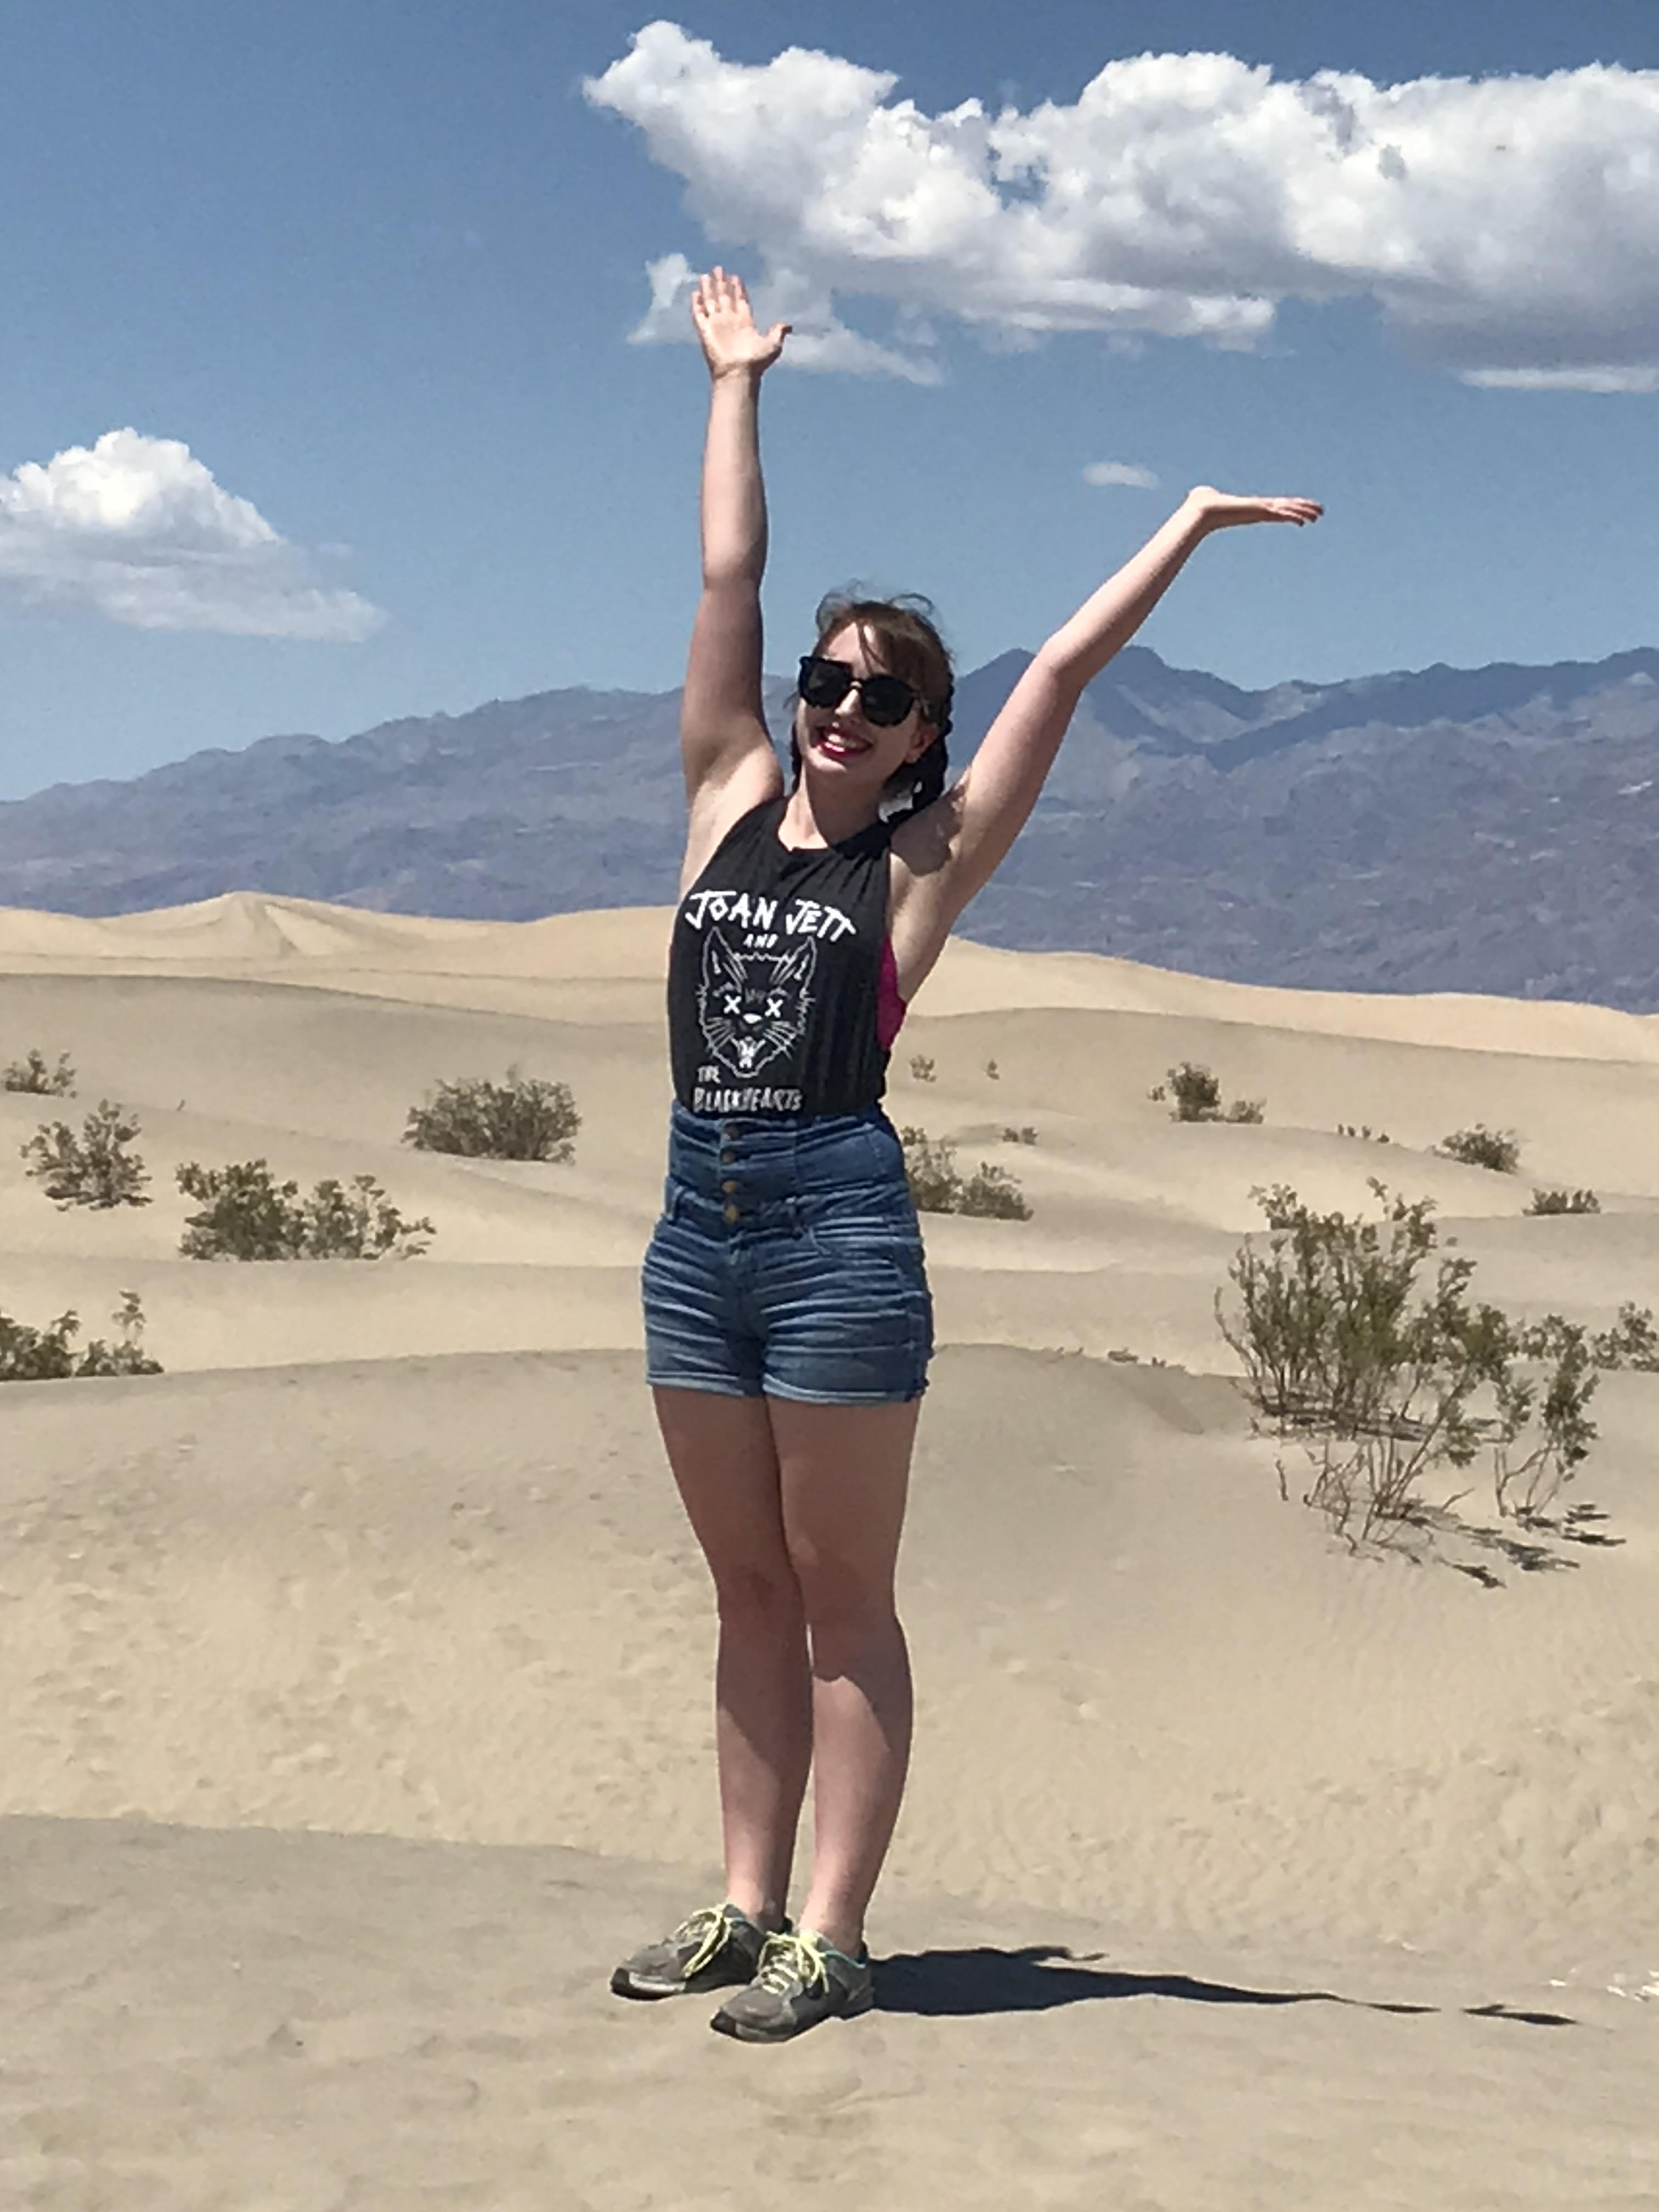 Photo of Noelle at the sand dunes in Death Valley